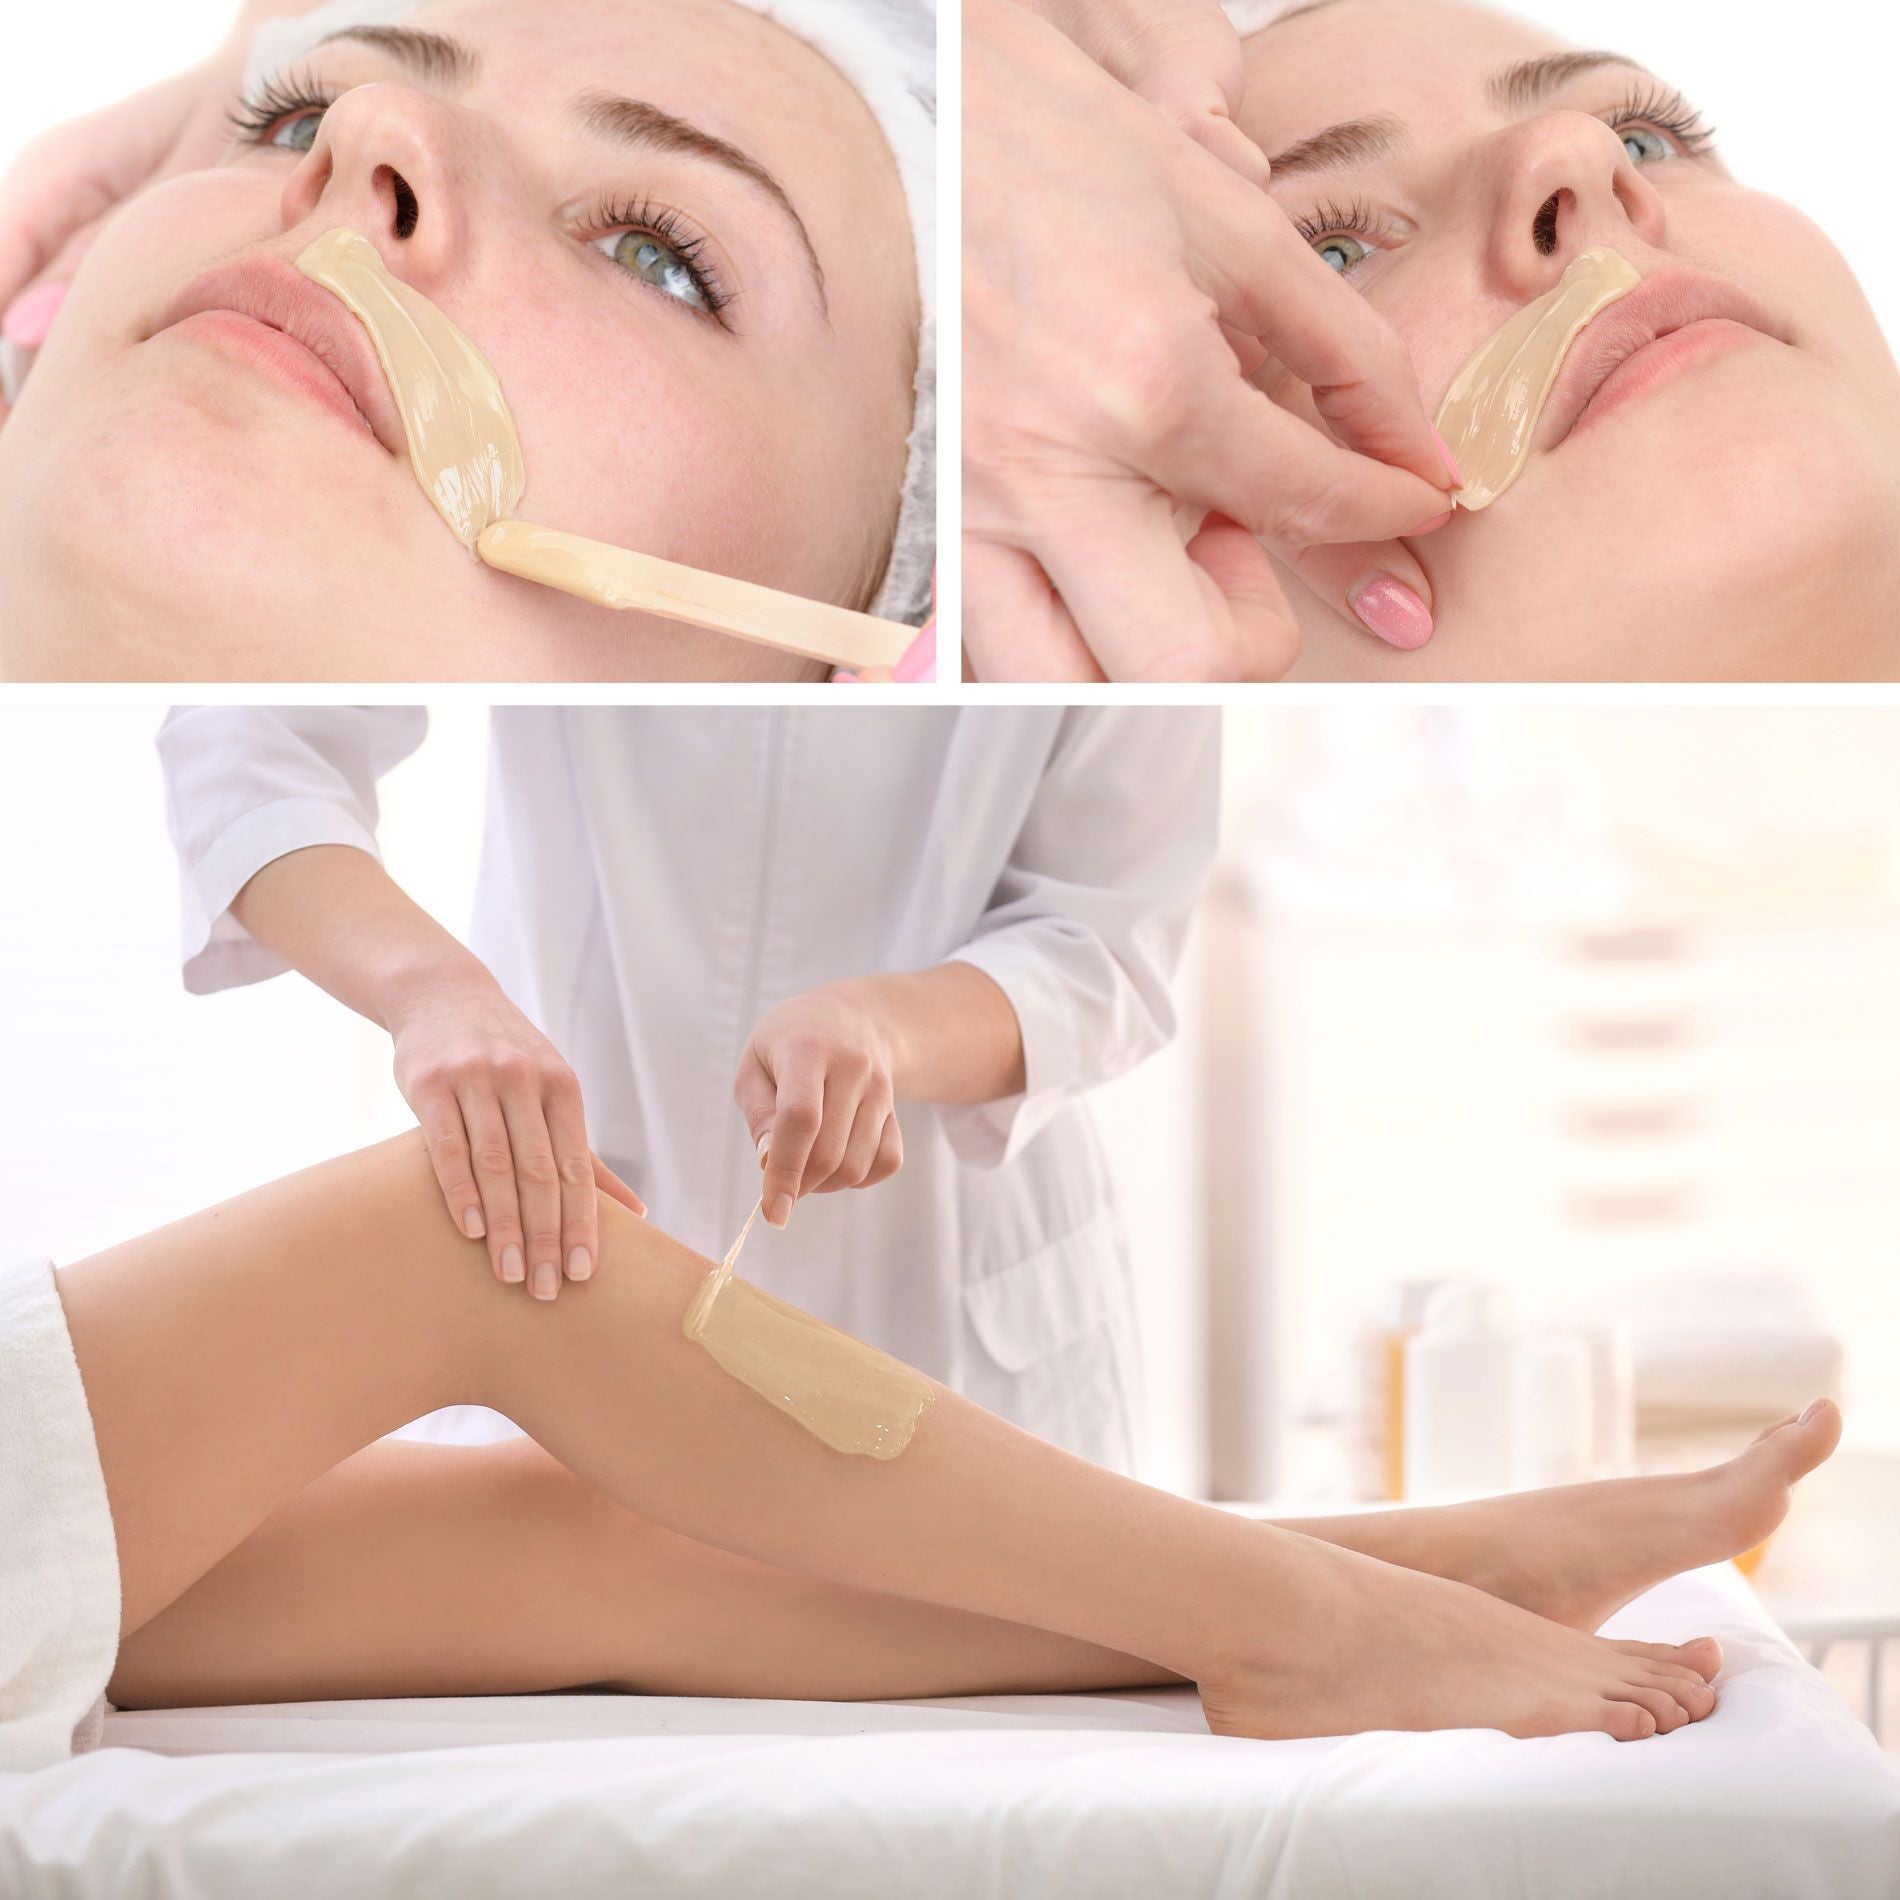 various images of lady having upperlip and legs waxed with honey wax